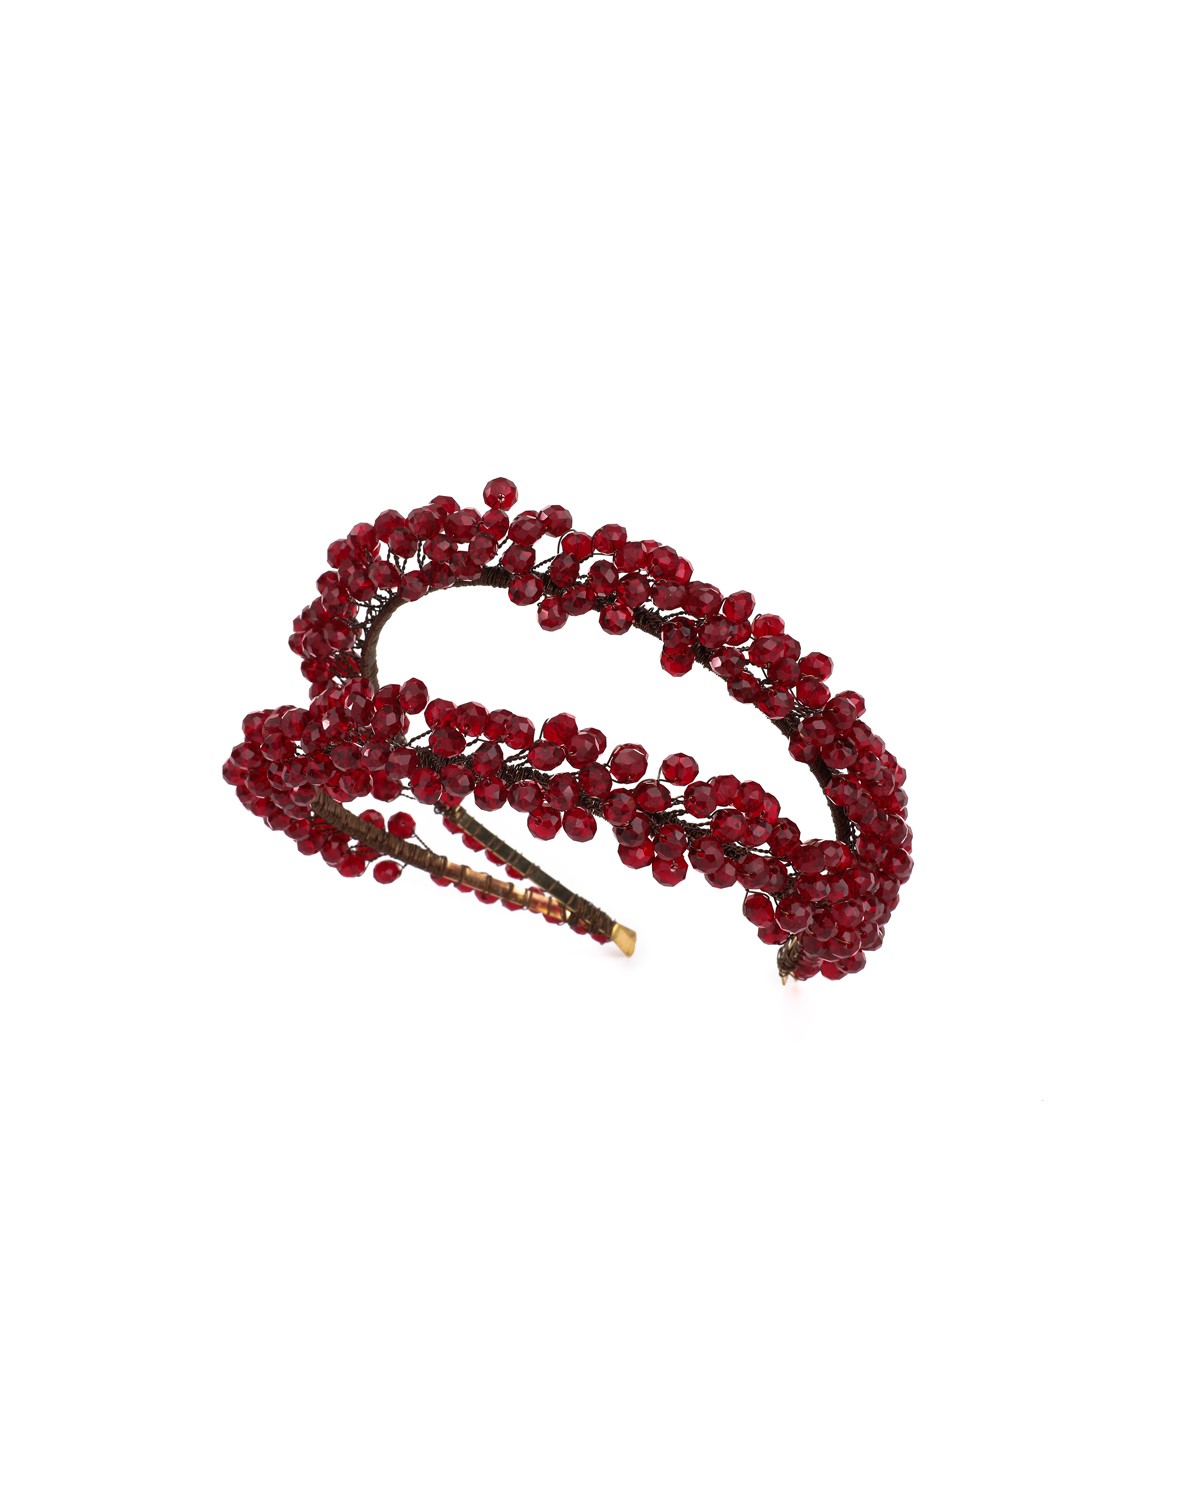 Yulas Crystal Bead Two Row Hair Accessories Buy Now.